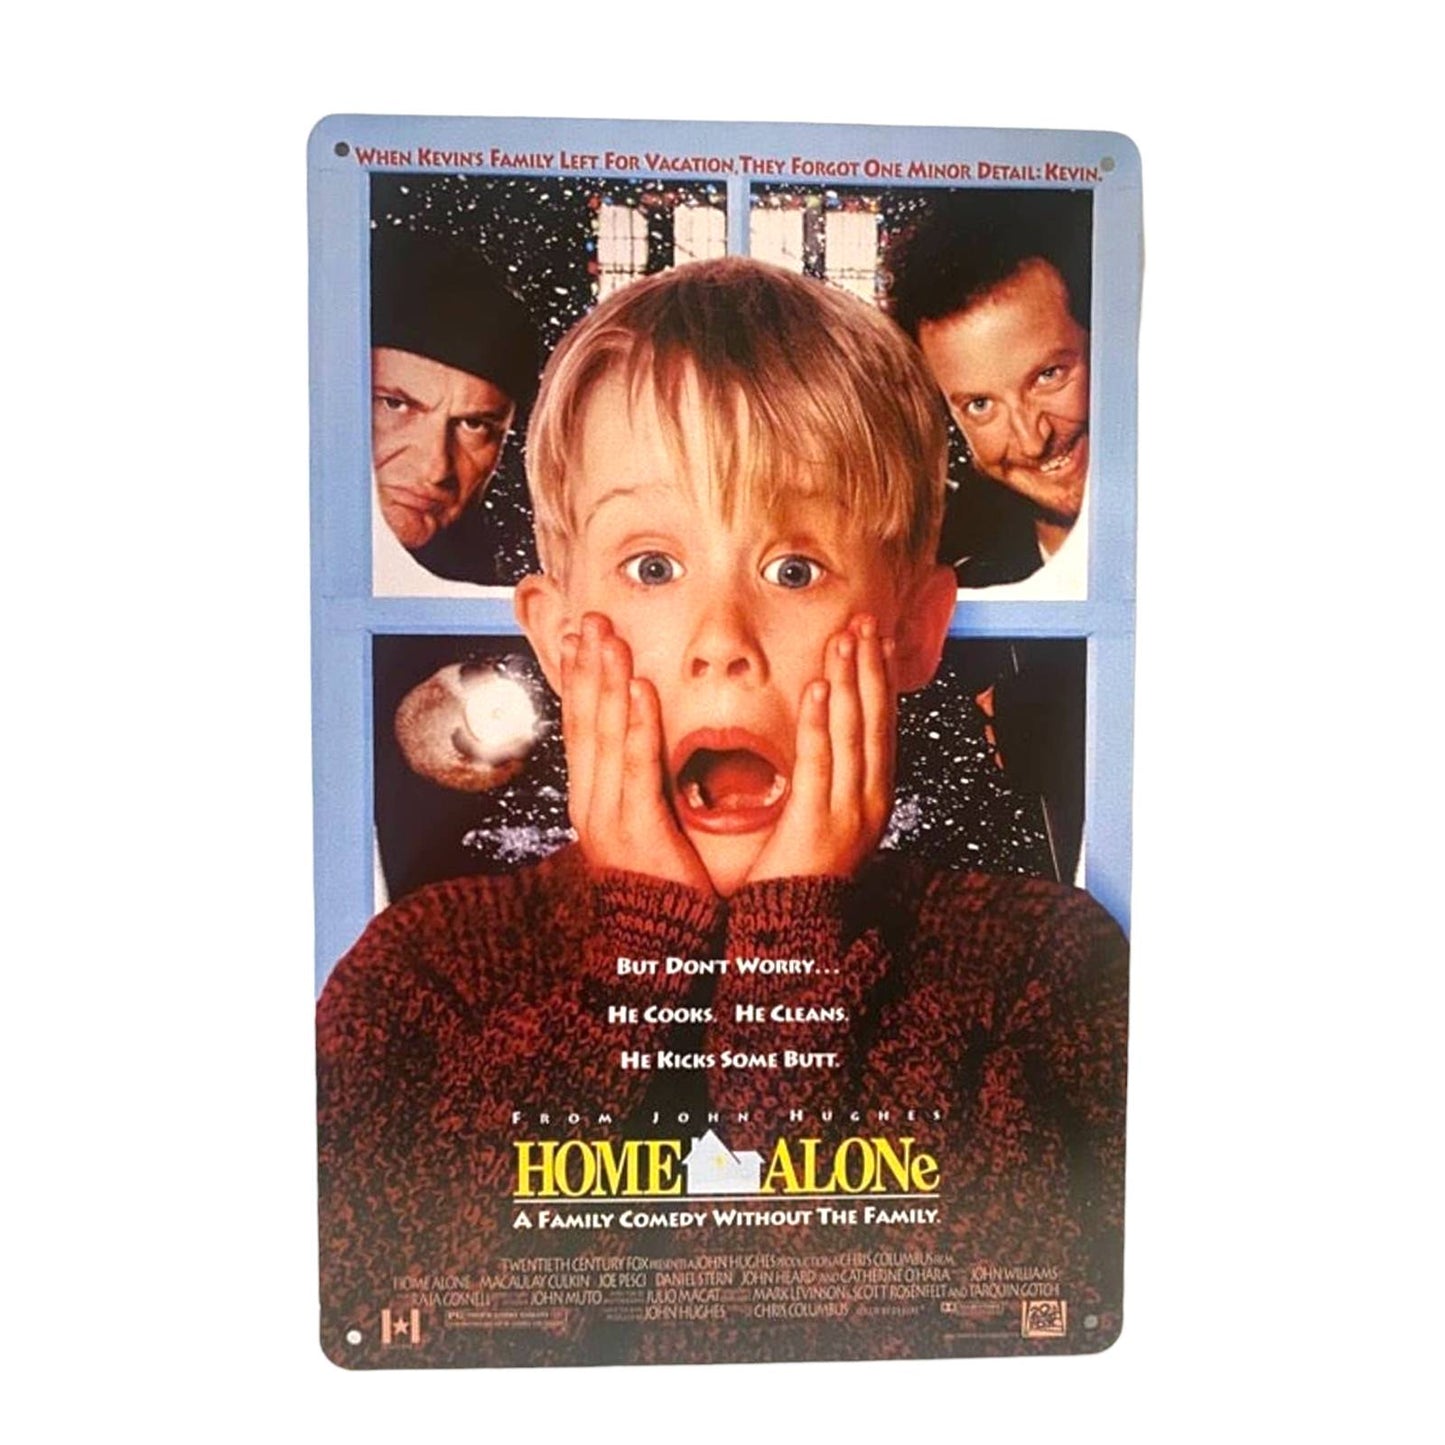 Home Alone Movie Poster Metal Tin Sign 8"x12"